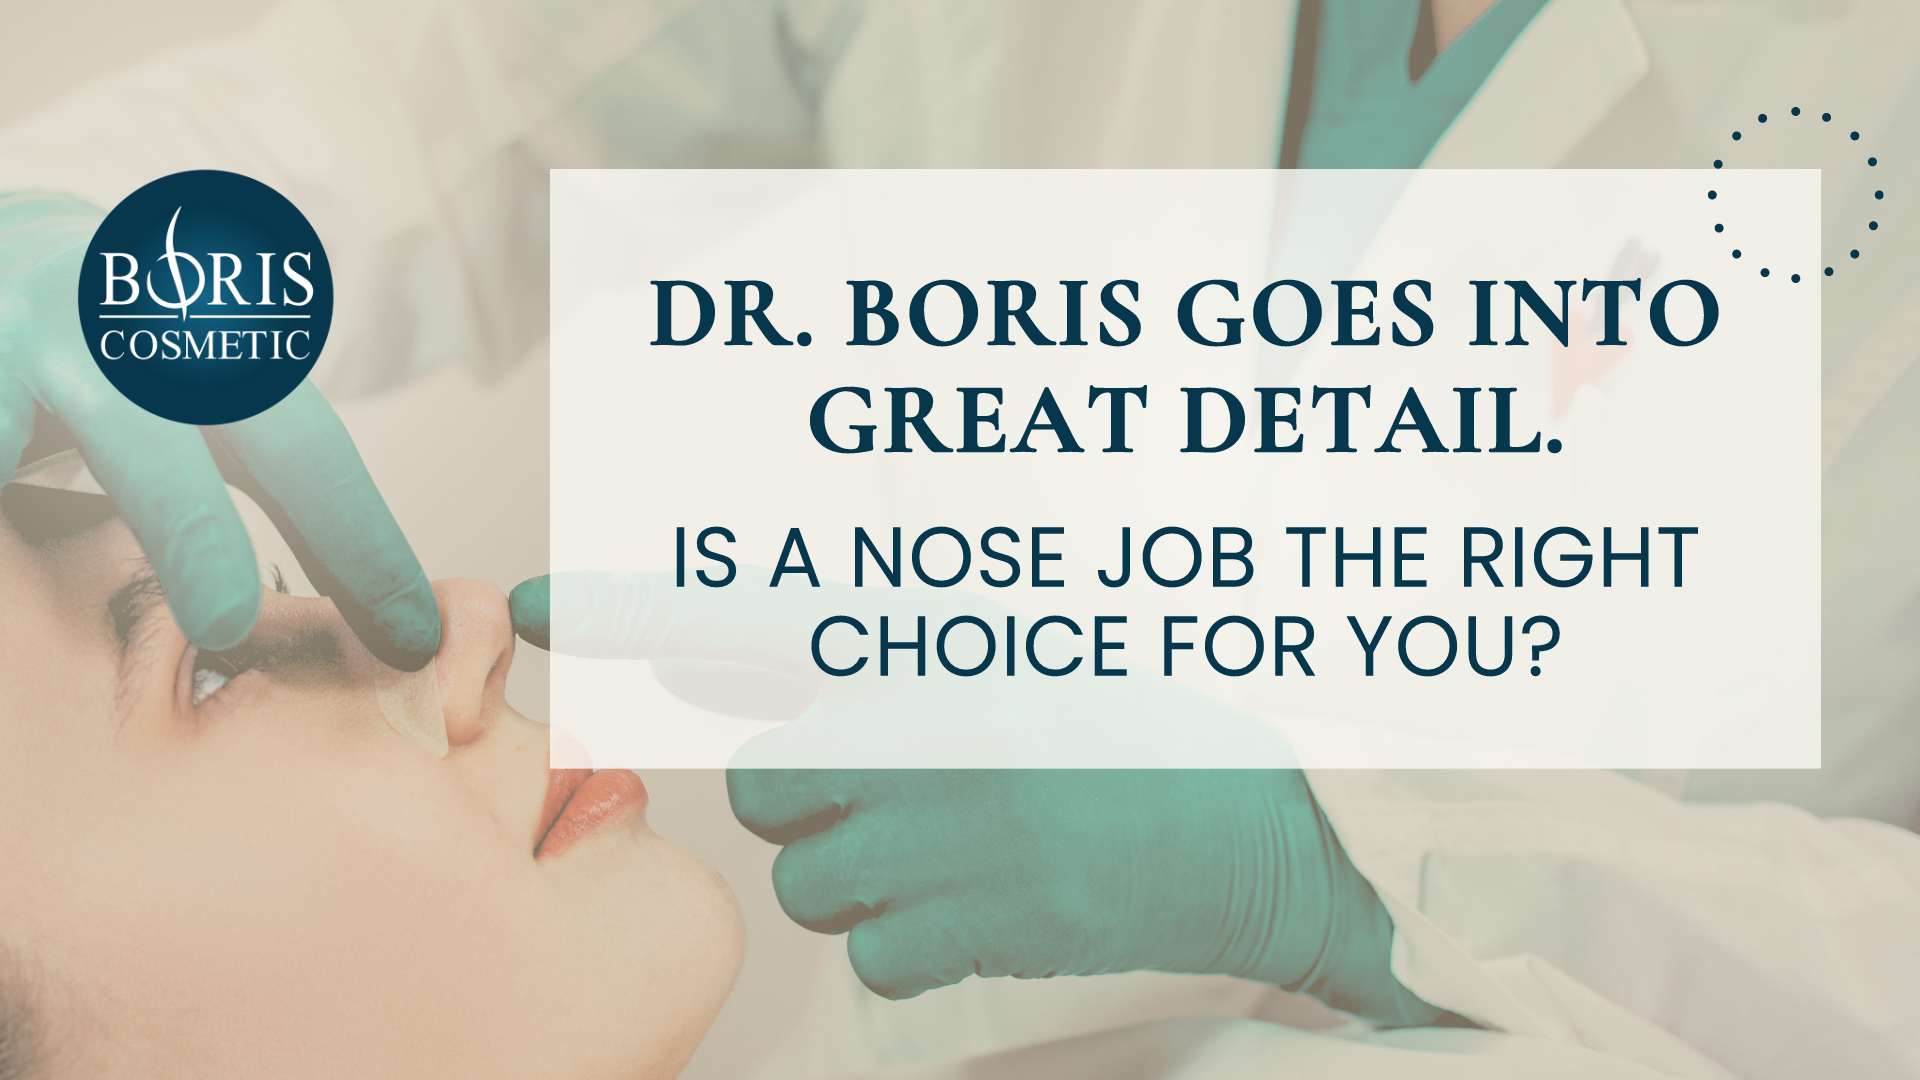 Dr. Boris Goes Into Great Detail. Is A Nose Job The Right Choice For You